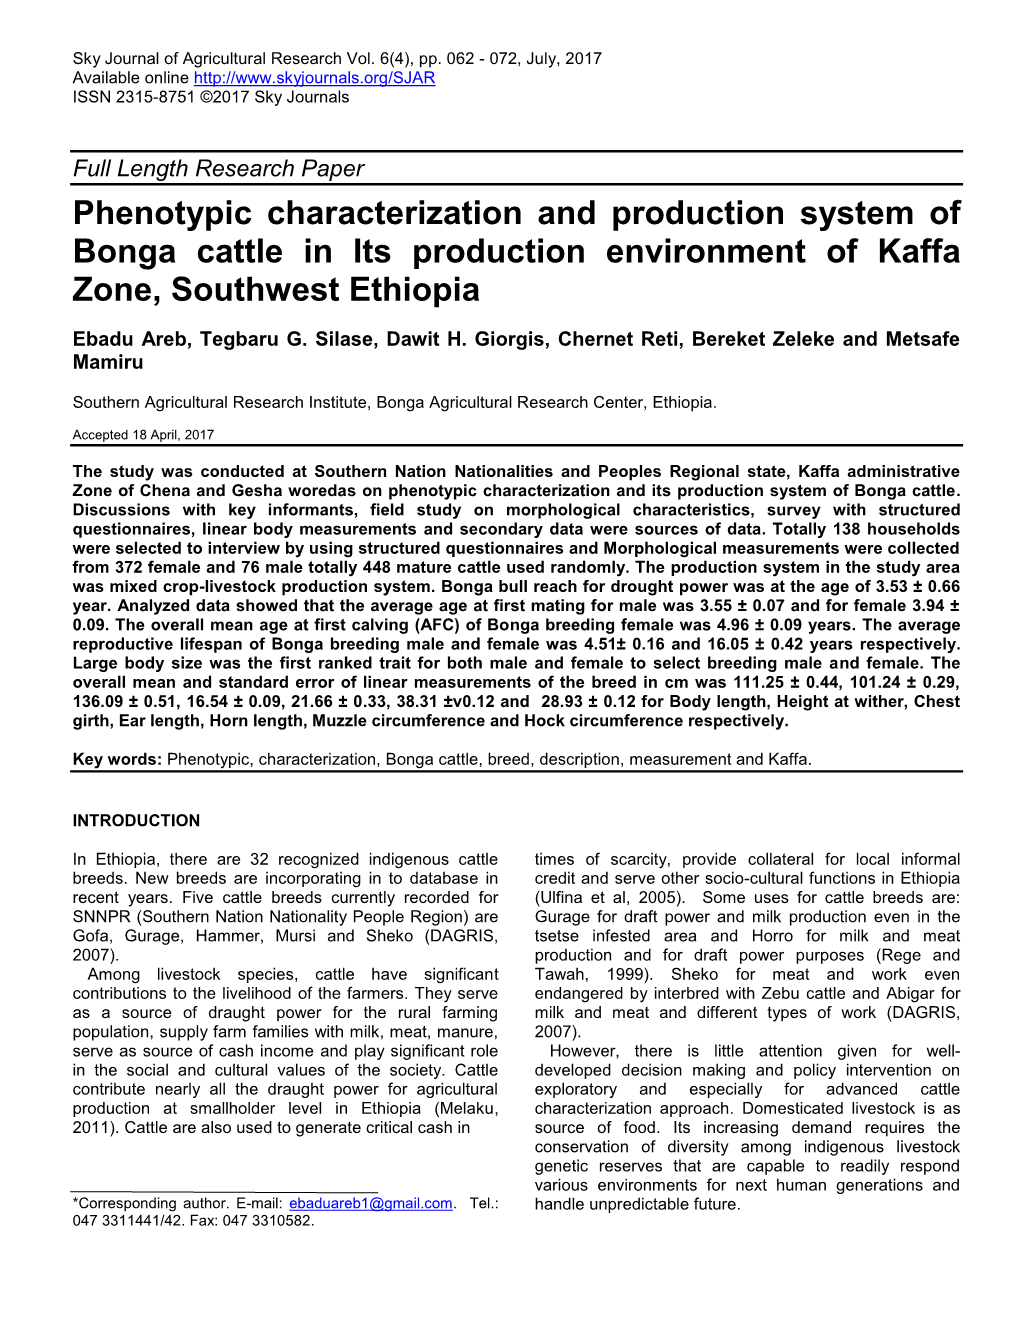 Phynotypic Characterization and Production System of Bonga Breed